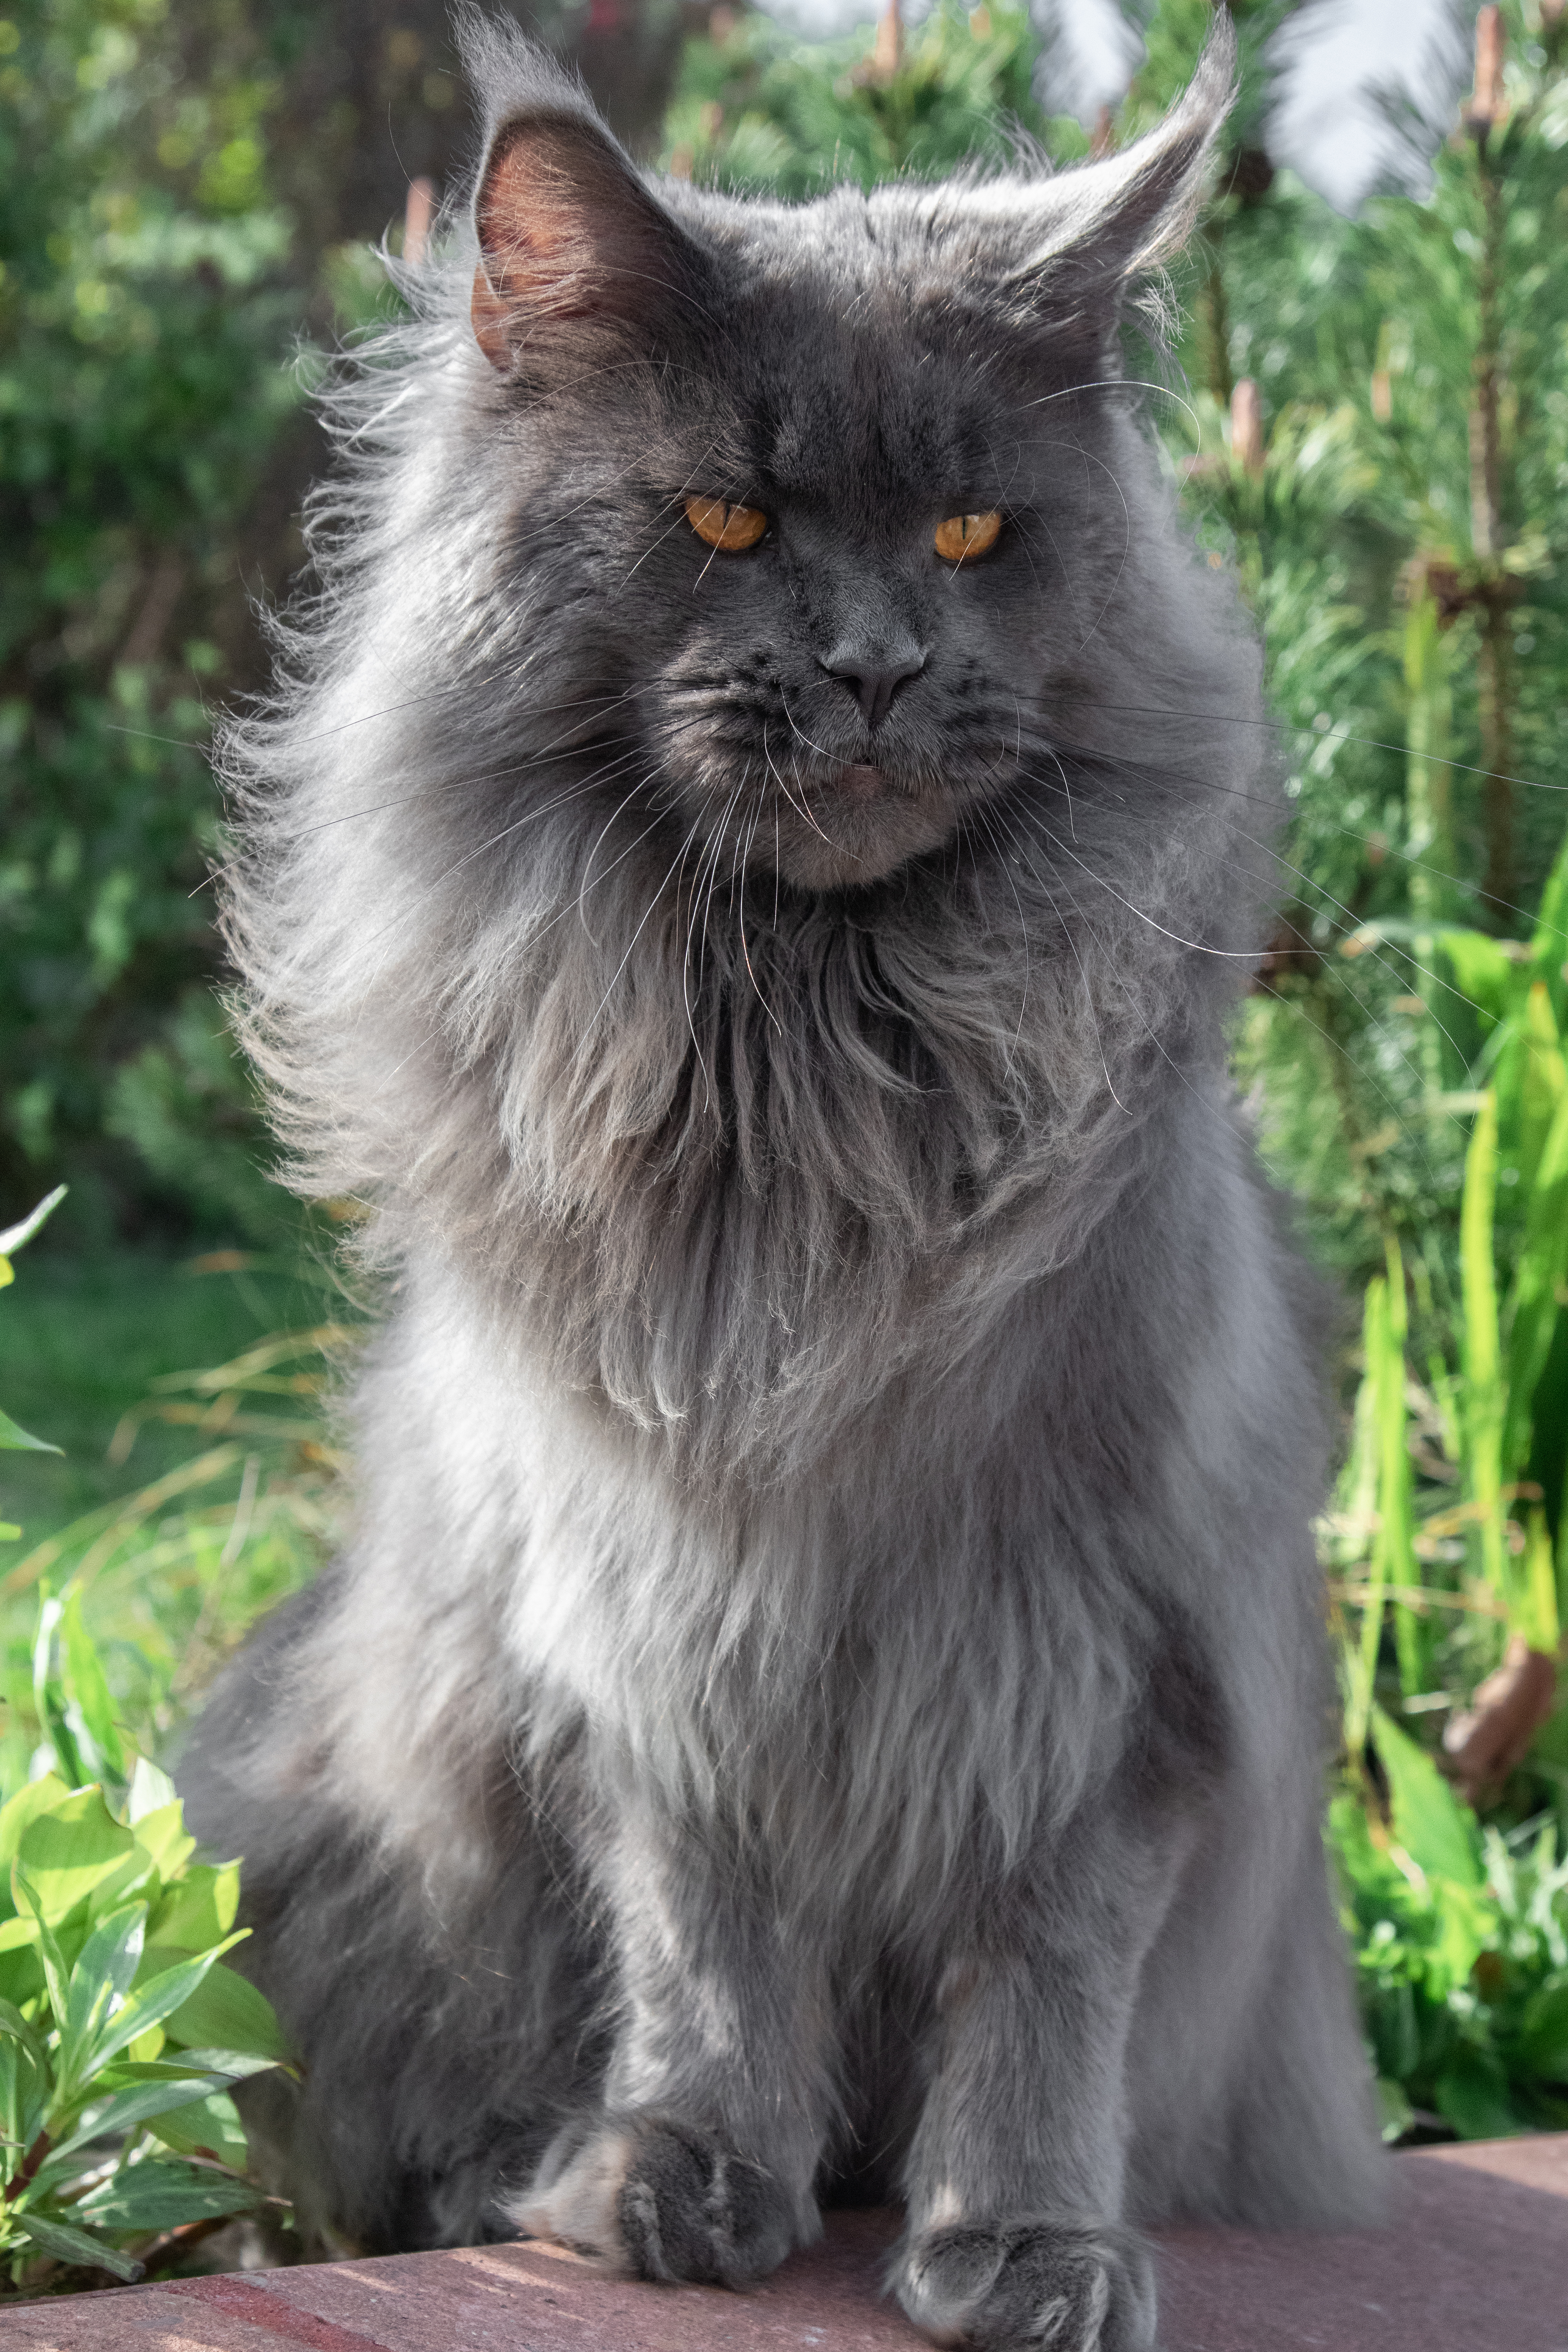 Blue Maine Coon